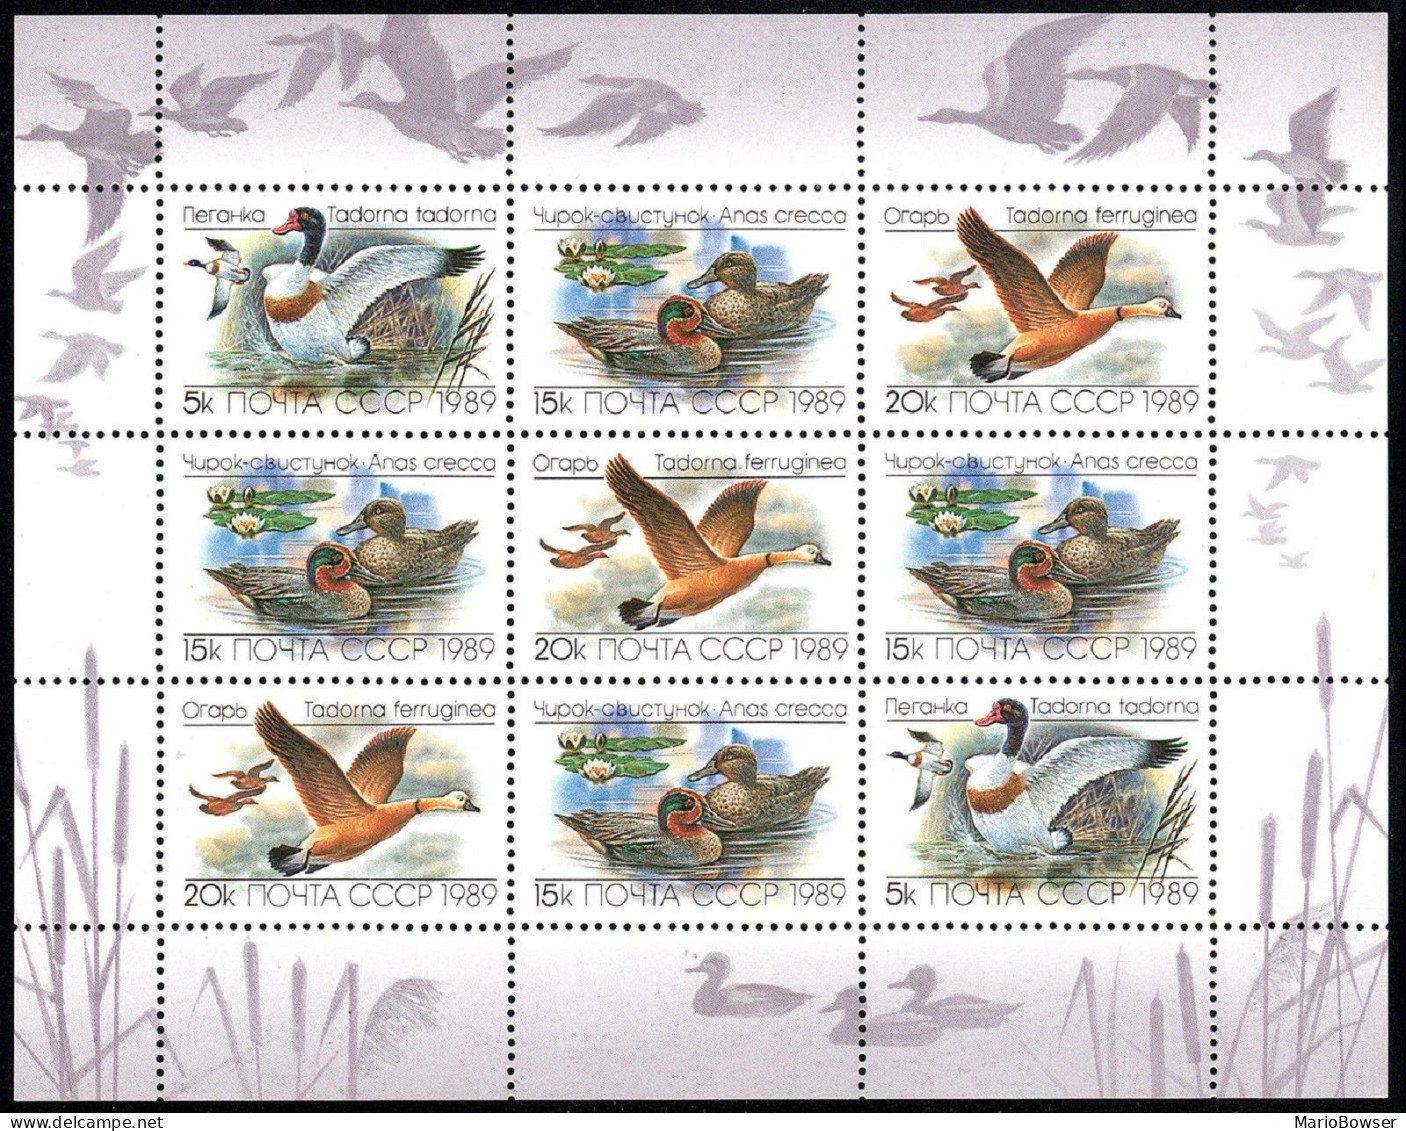 Russia 5785a Sheet Of 9, MNH. Michel 5965-5967 Klb. Ducks 1989. - Unused Stamps